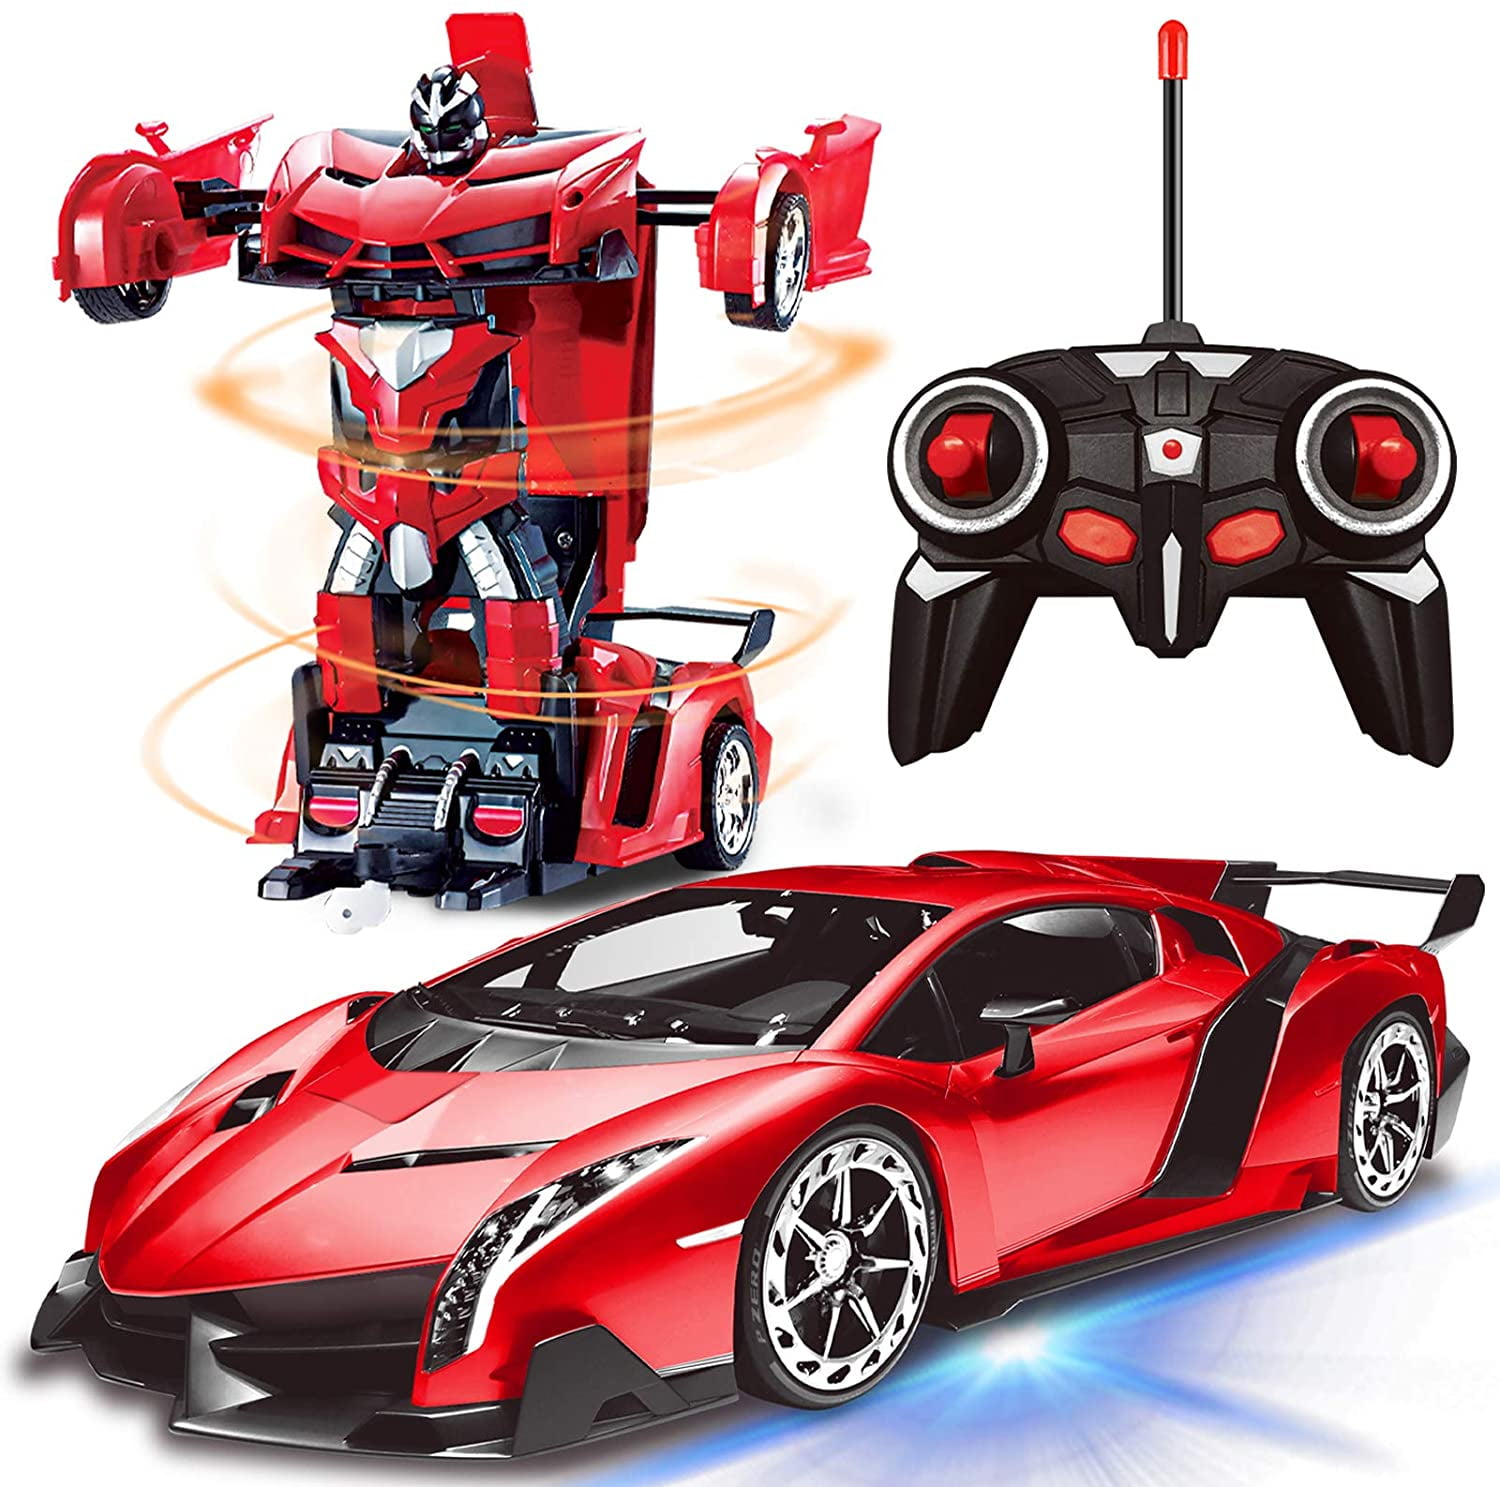 Transformation yellow 2.4g robot car Rc remote control deformation rechargeable 